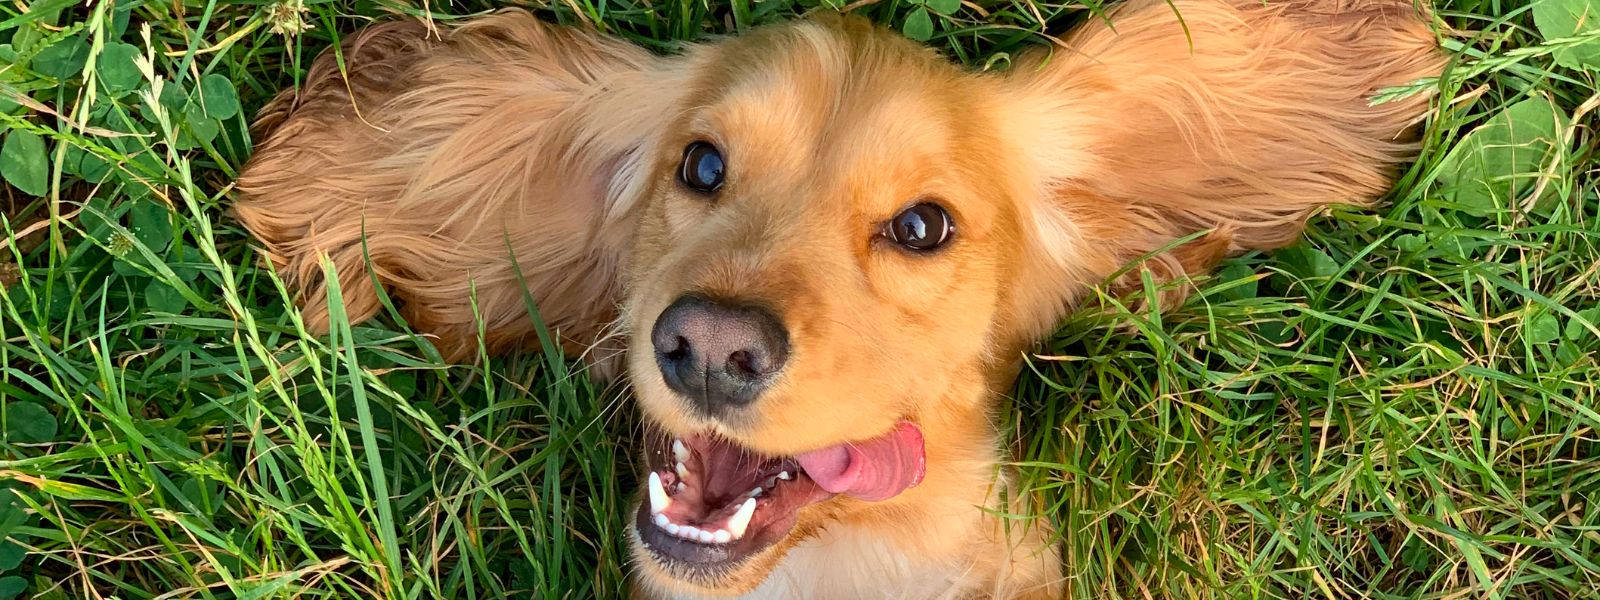 How to care for your dog’s teeth